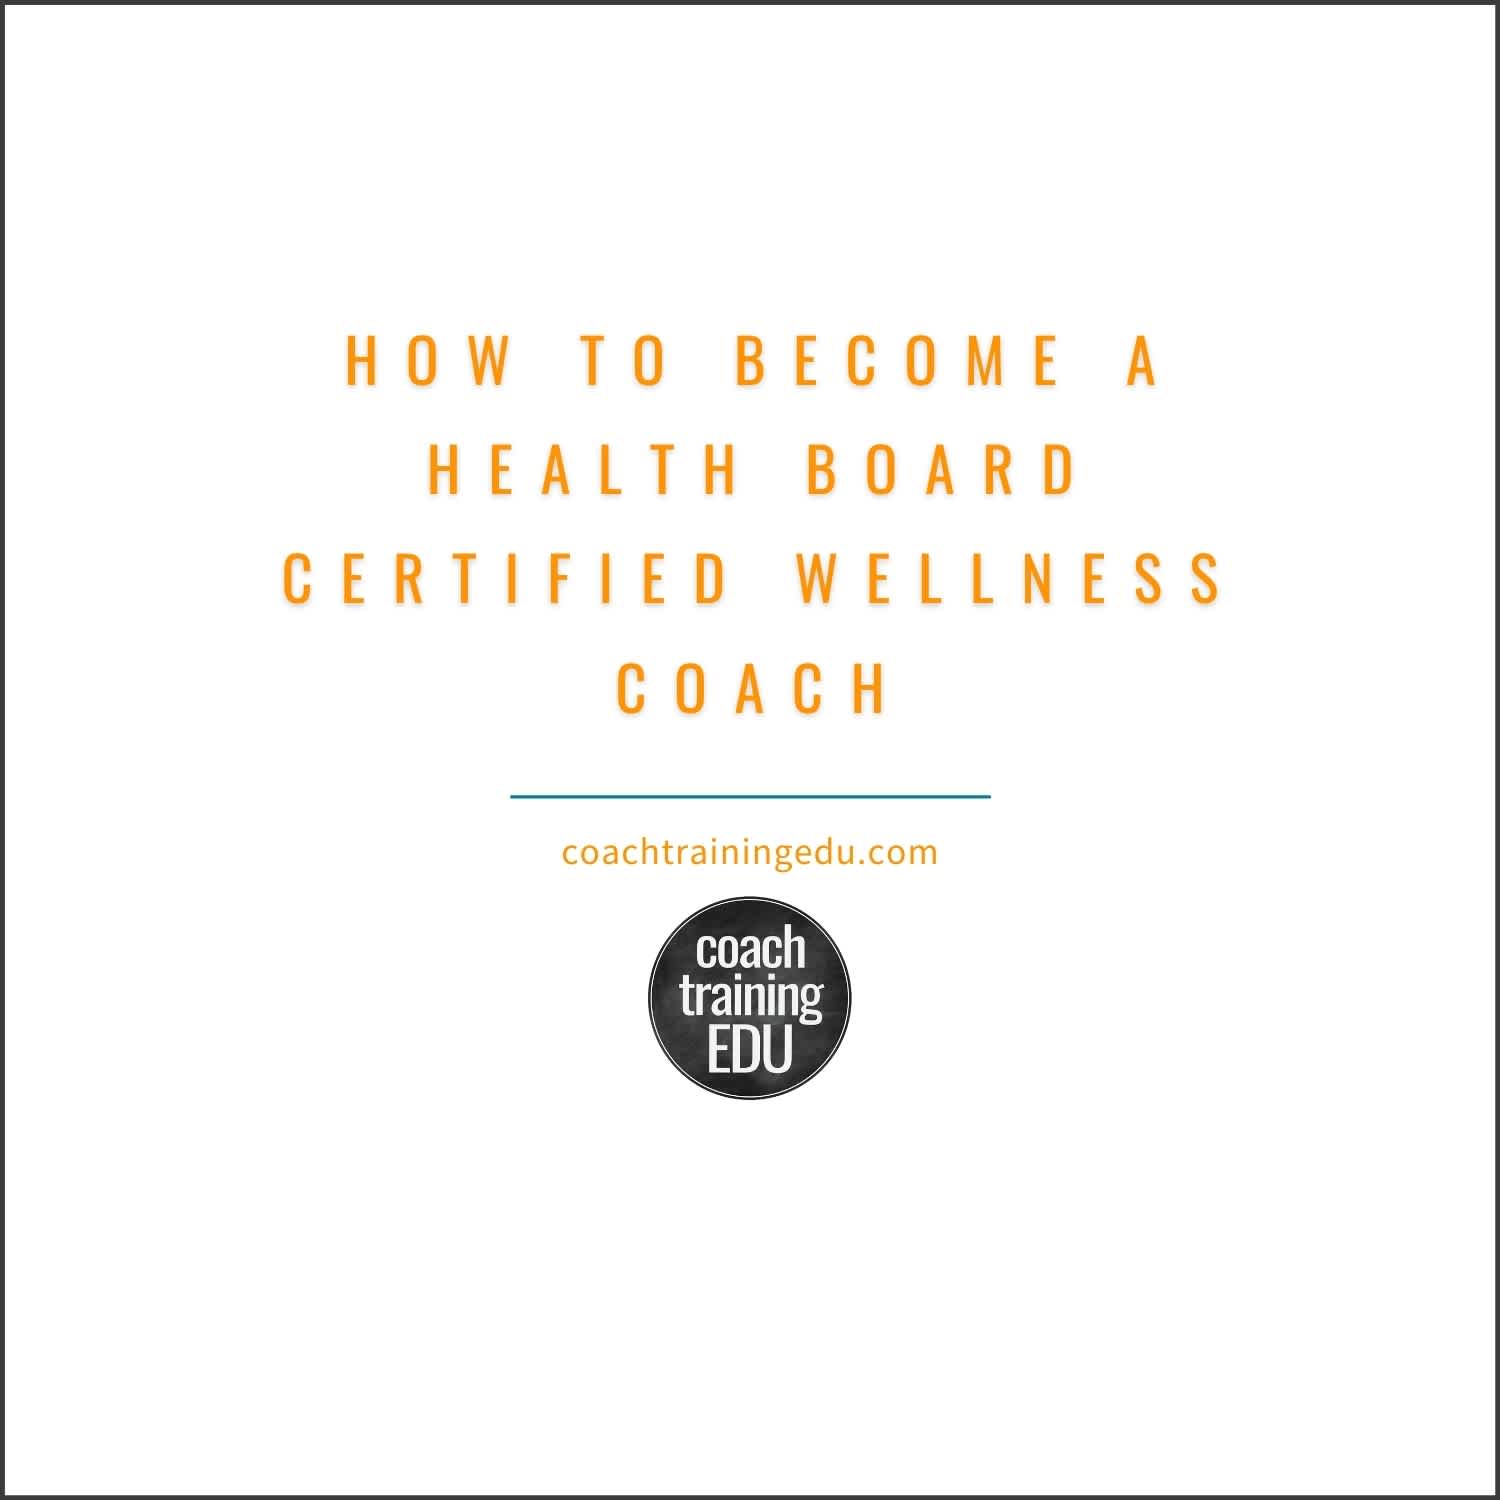 How to Become a Health Board Certified Wellness Coach